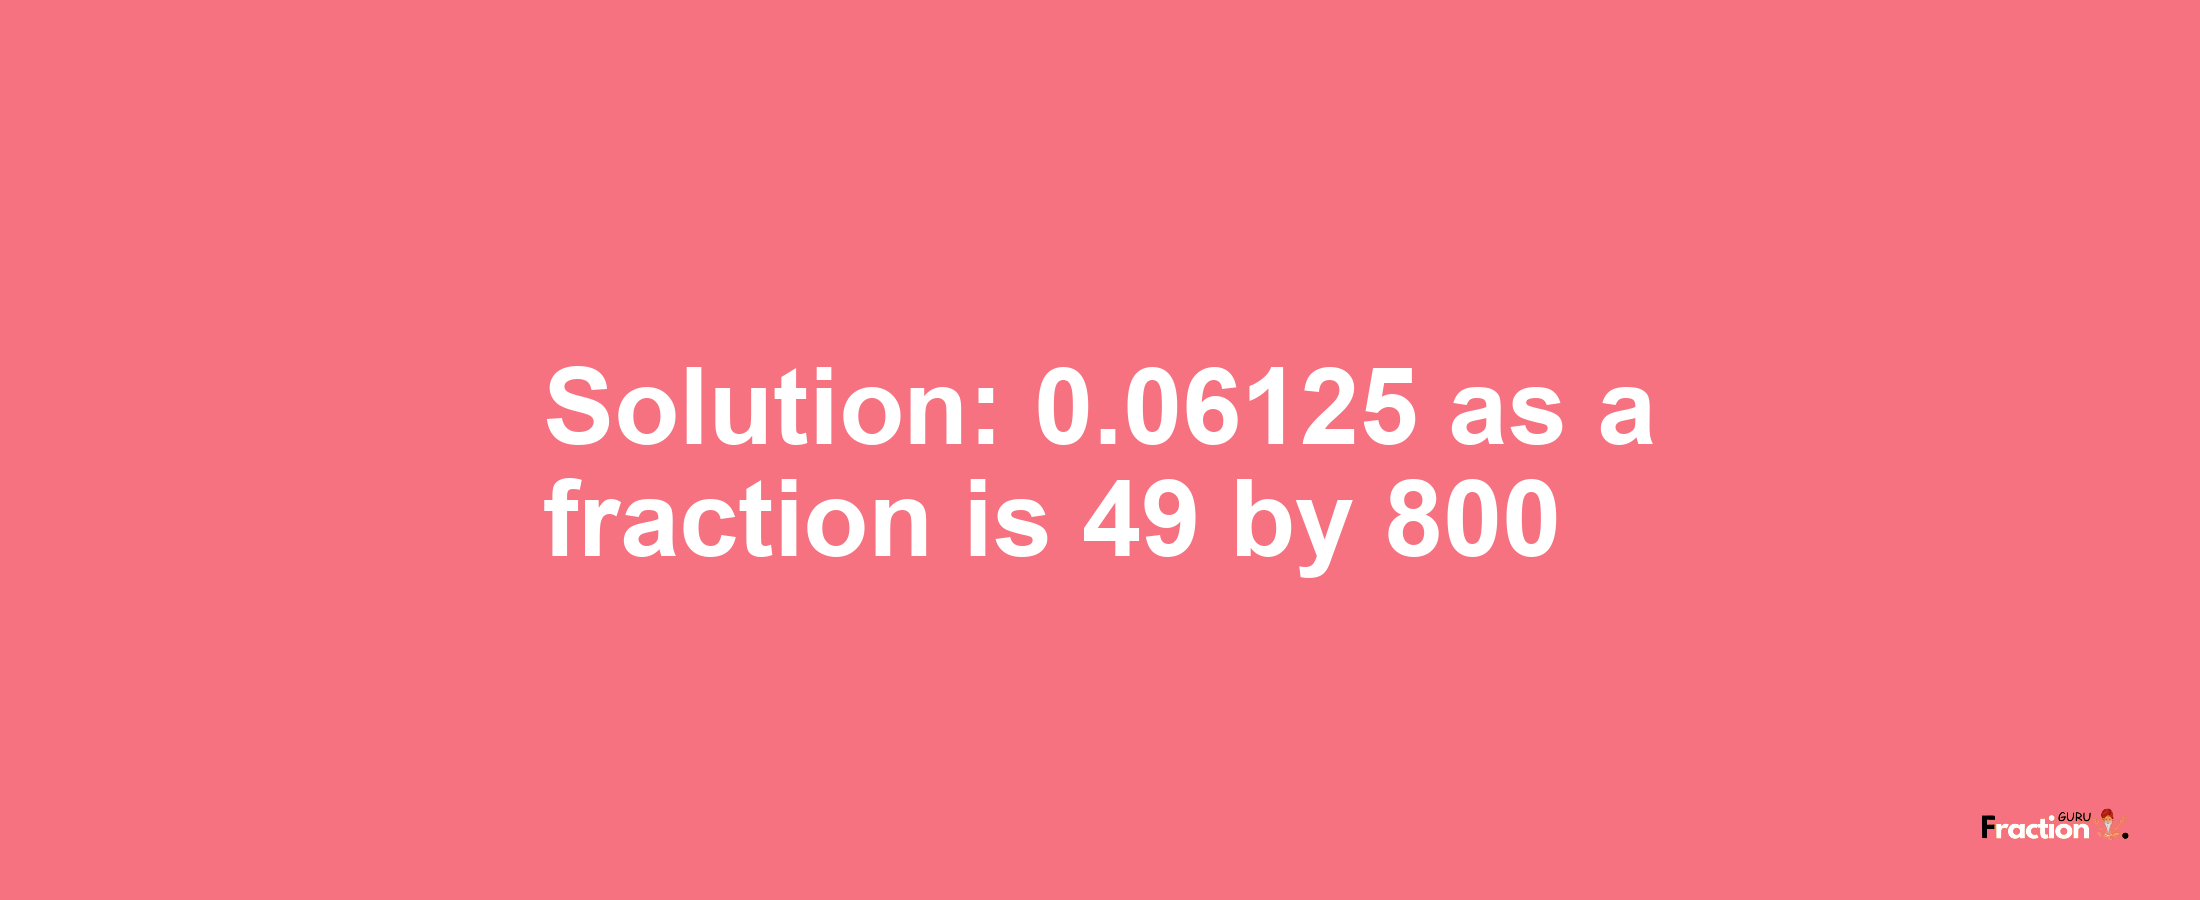 Solution:0.06125 as a fraction is 49/800